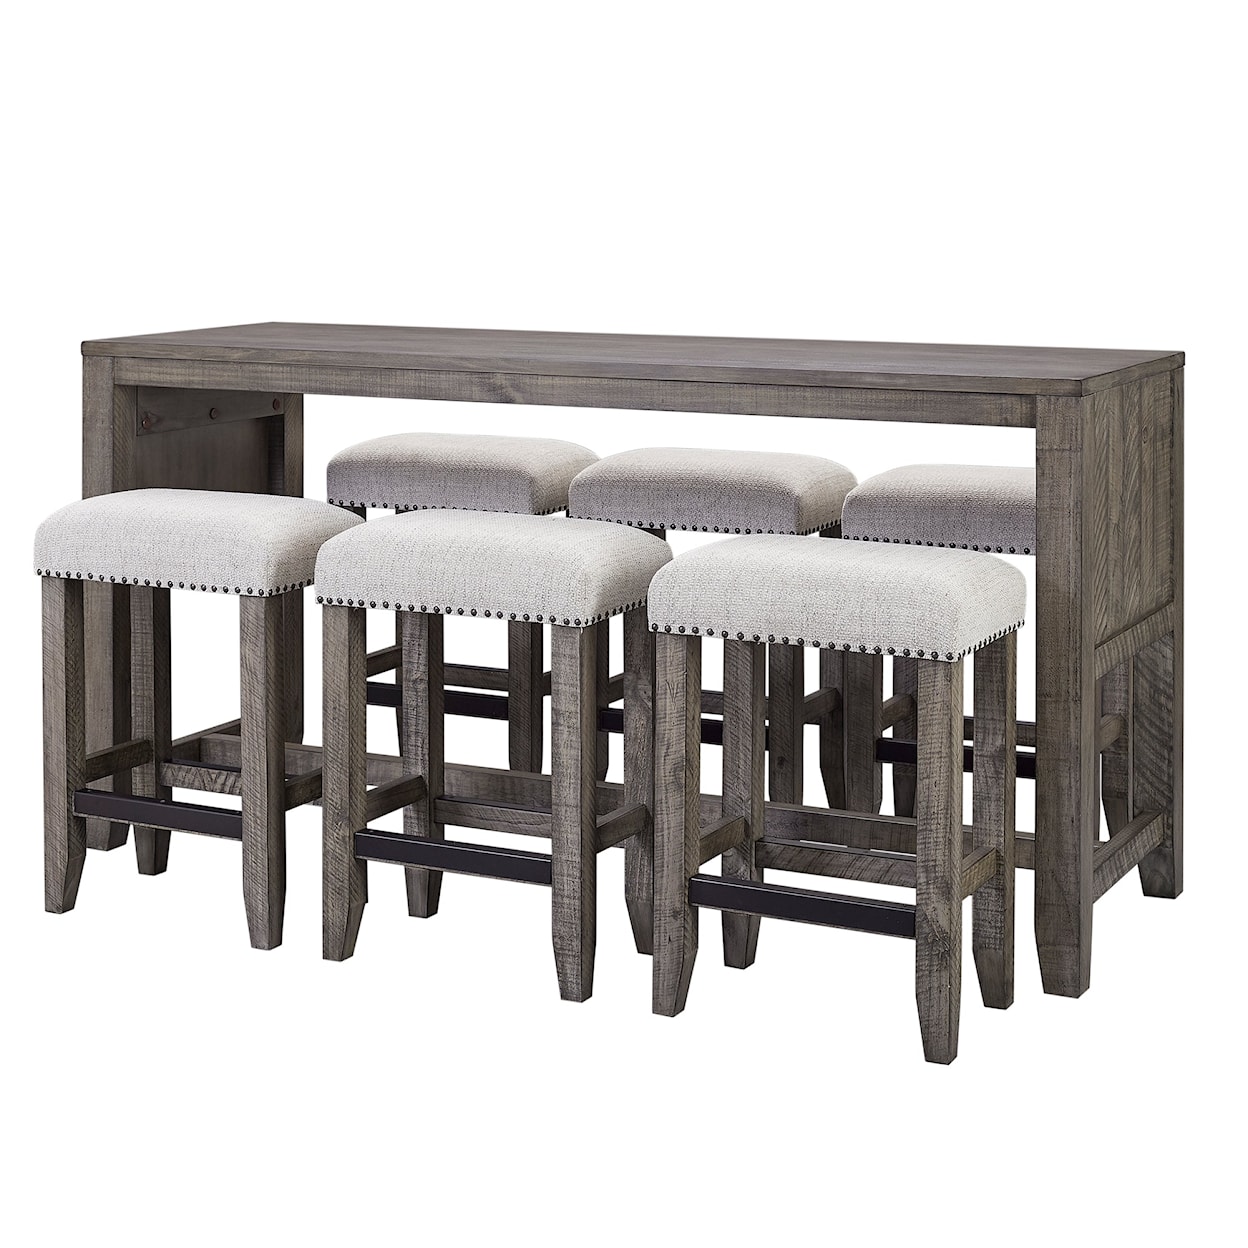 PH Tempe - Grey Stone Console Table with 6 Stools